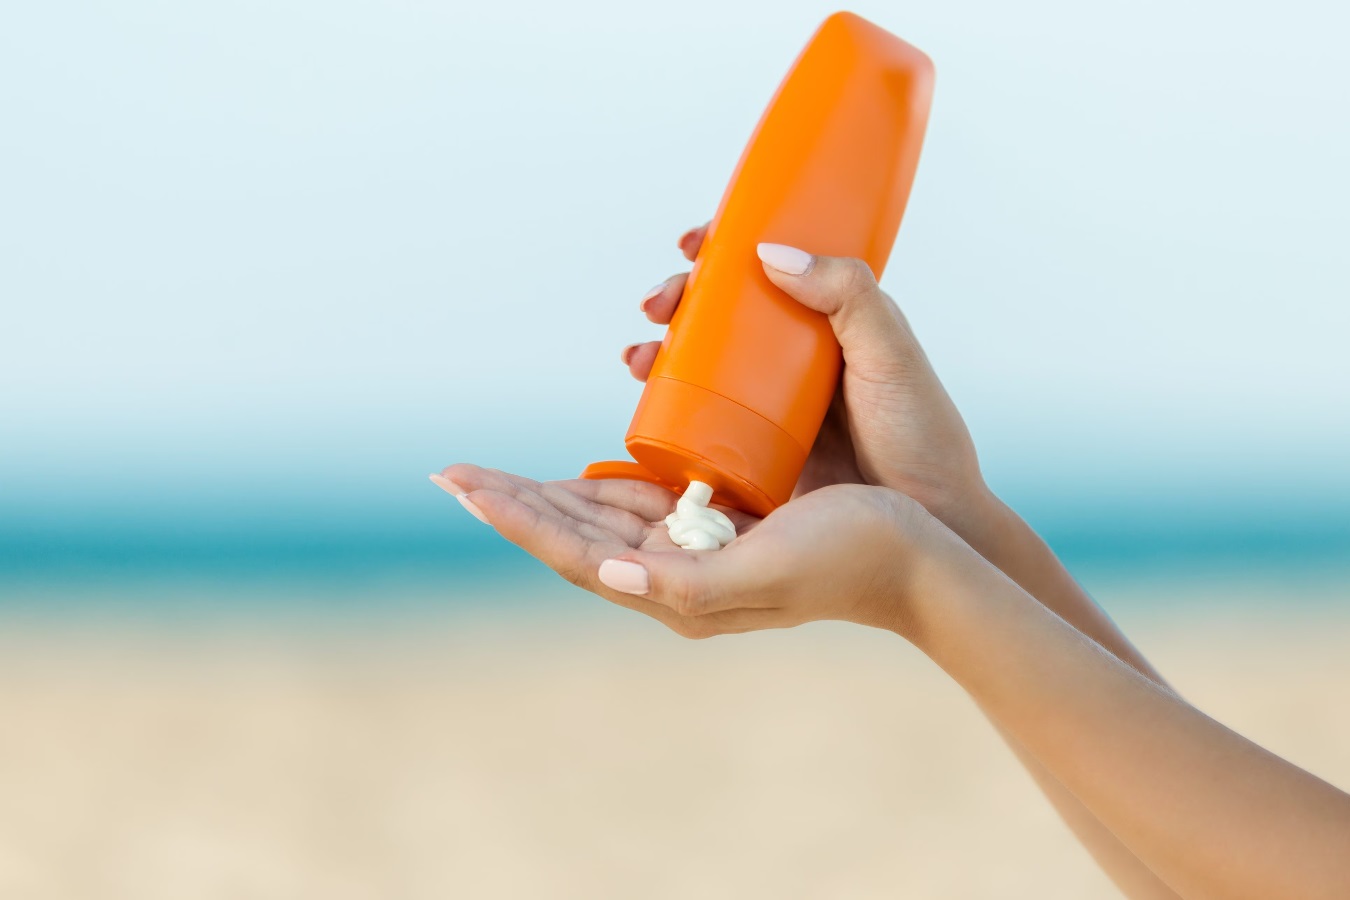 Sunscreen in the Arctic snow: here's what the risks could be